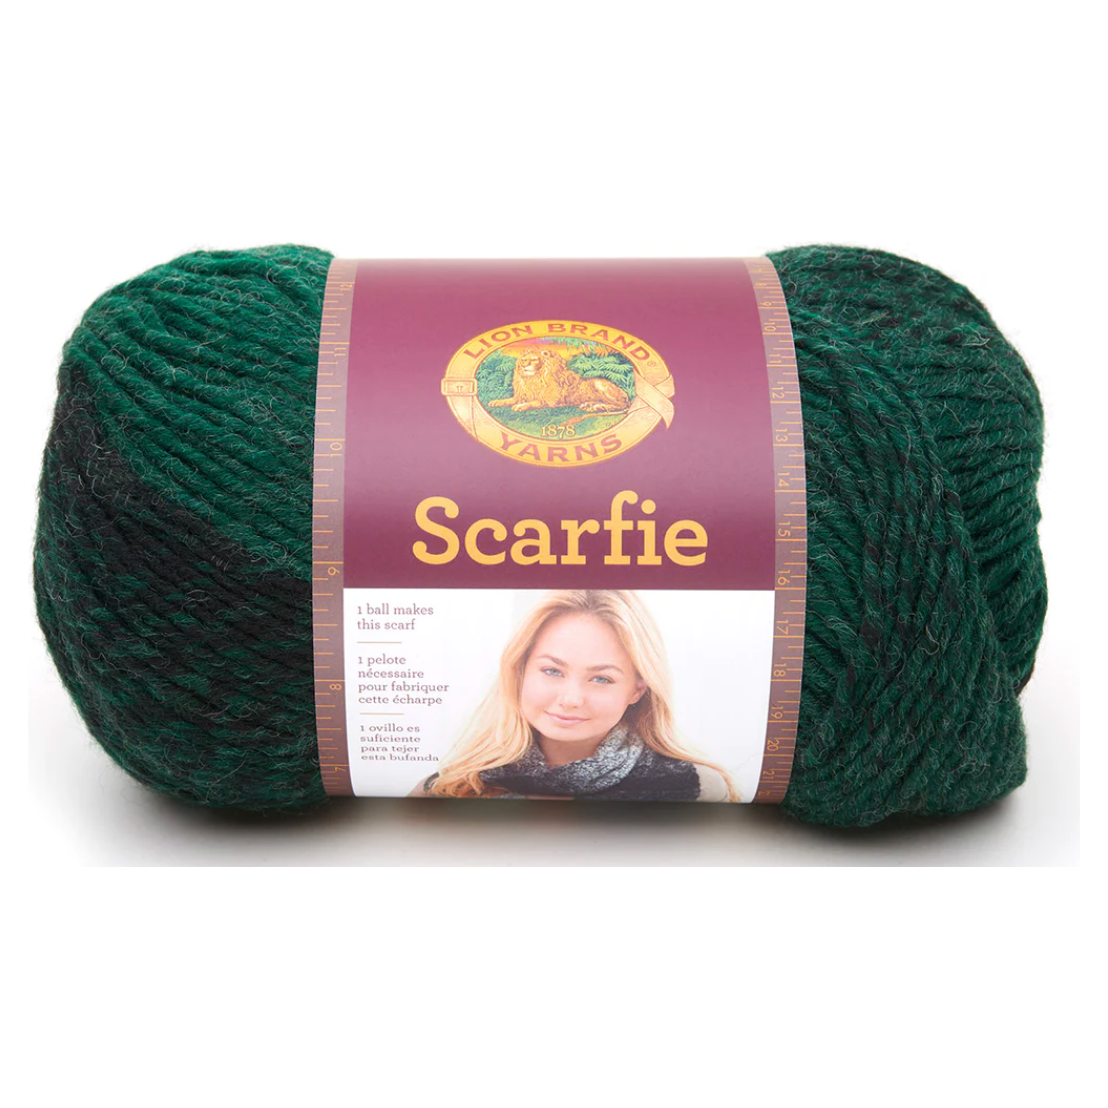 Lion Brand Scarfie Yarn Sold As A Pack Of 3